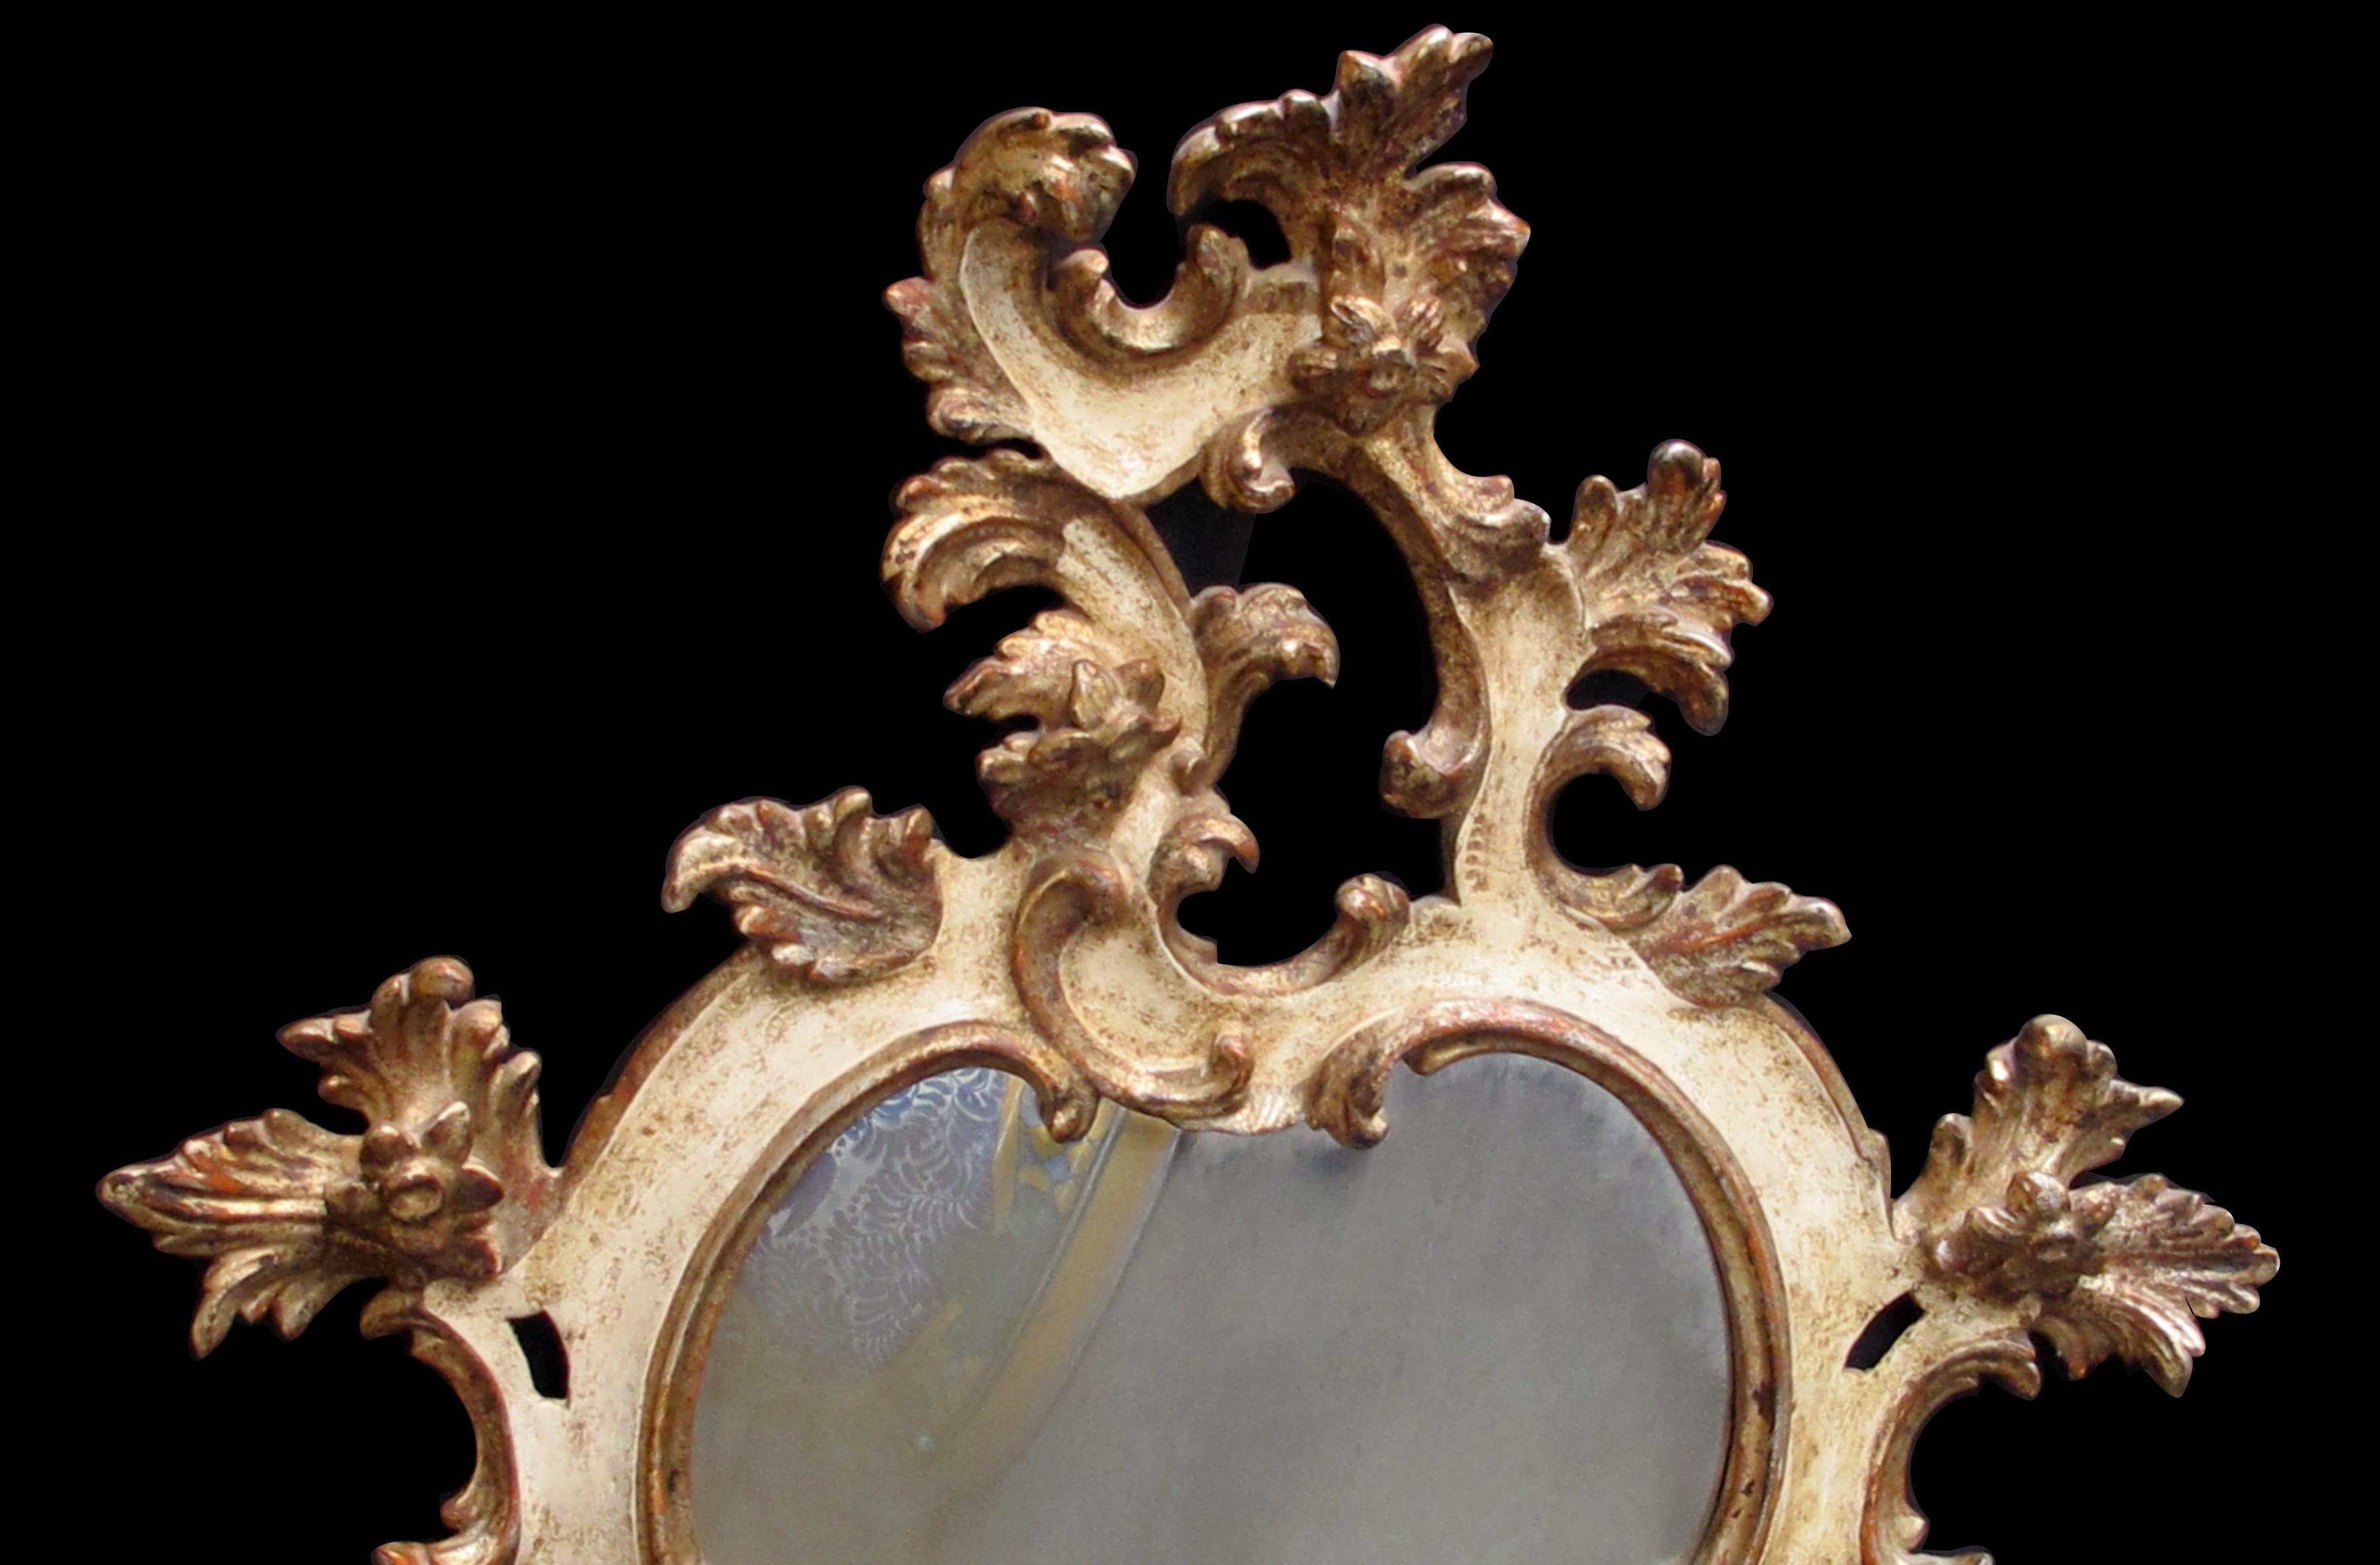 Italian Venetian Rococo Revival Ivory Painted and Parcel-Gilt Cartouche-Shaped Mirror For Sale